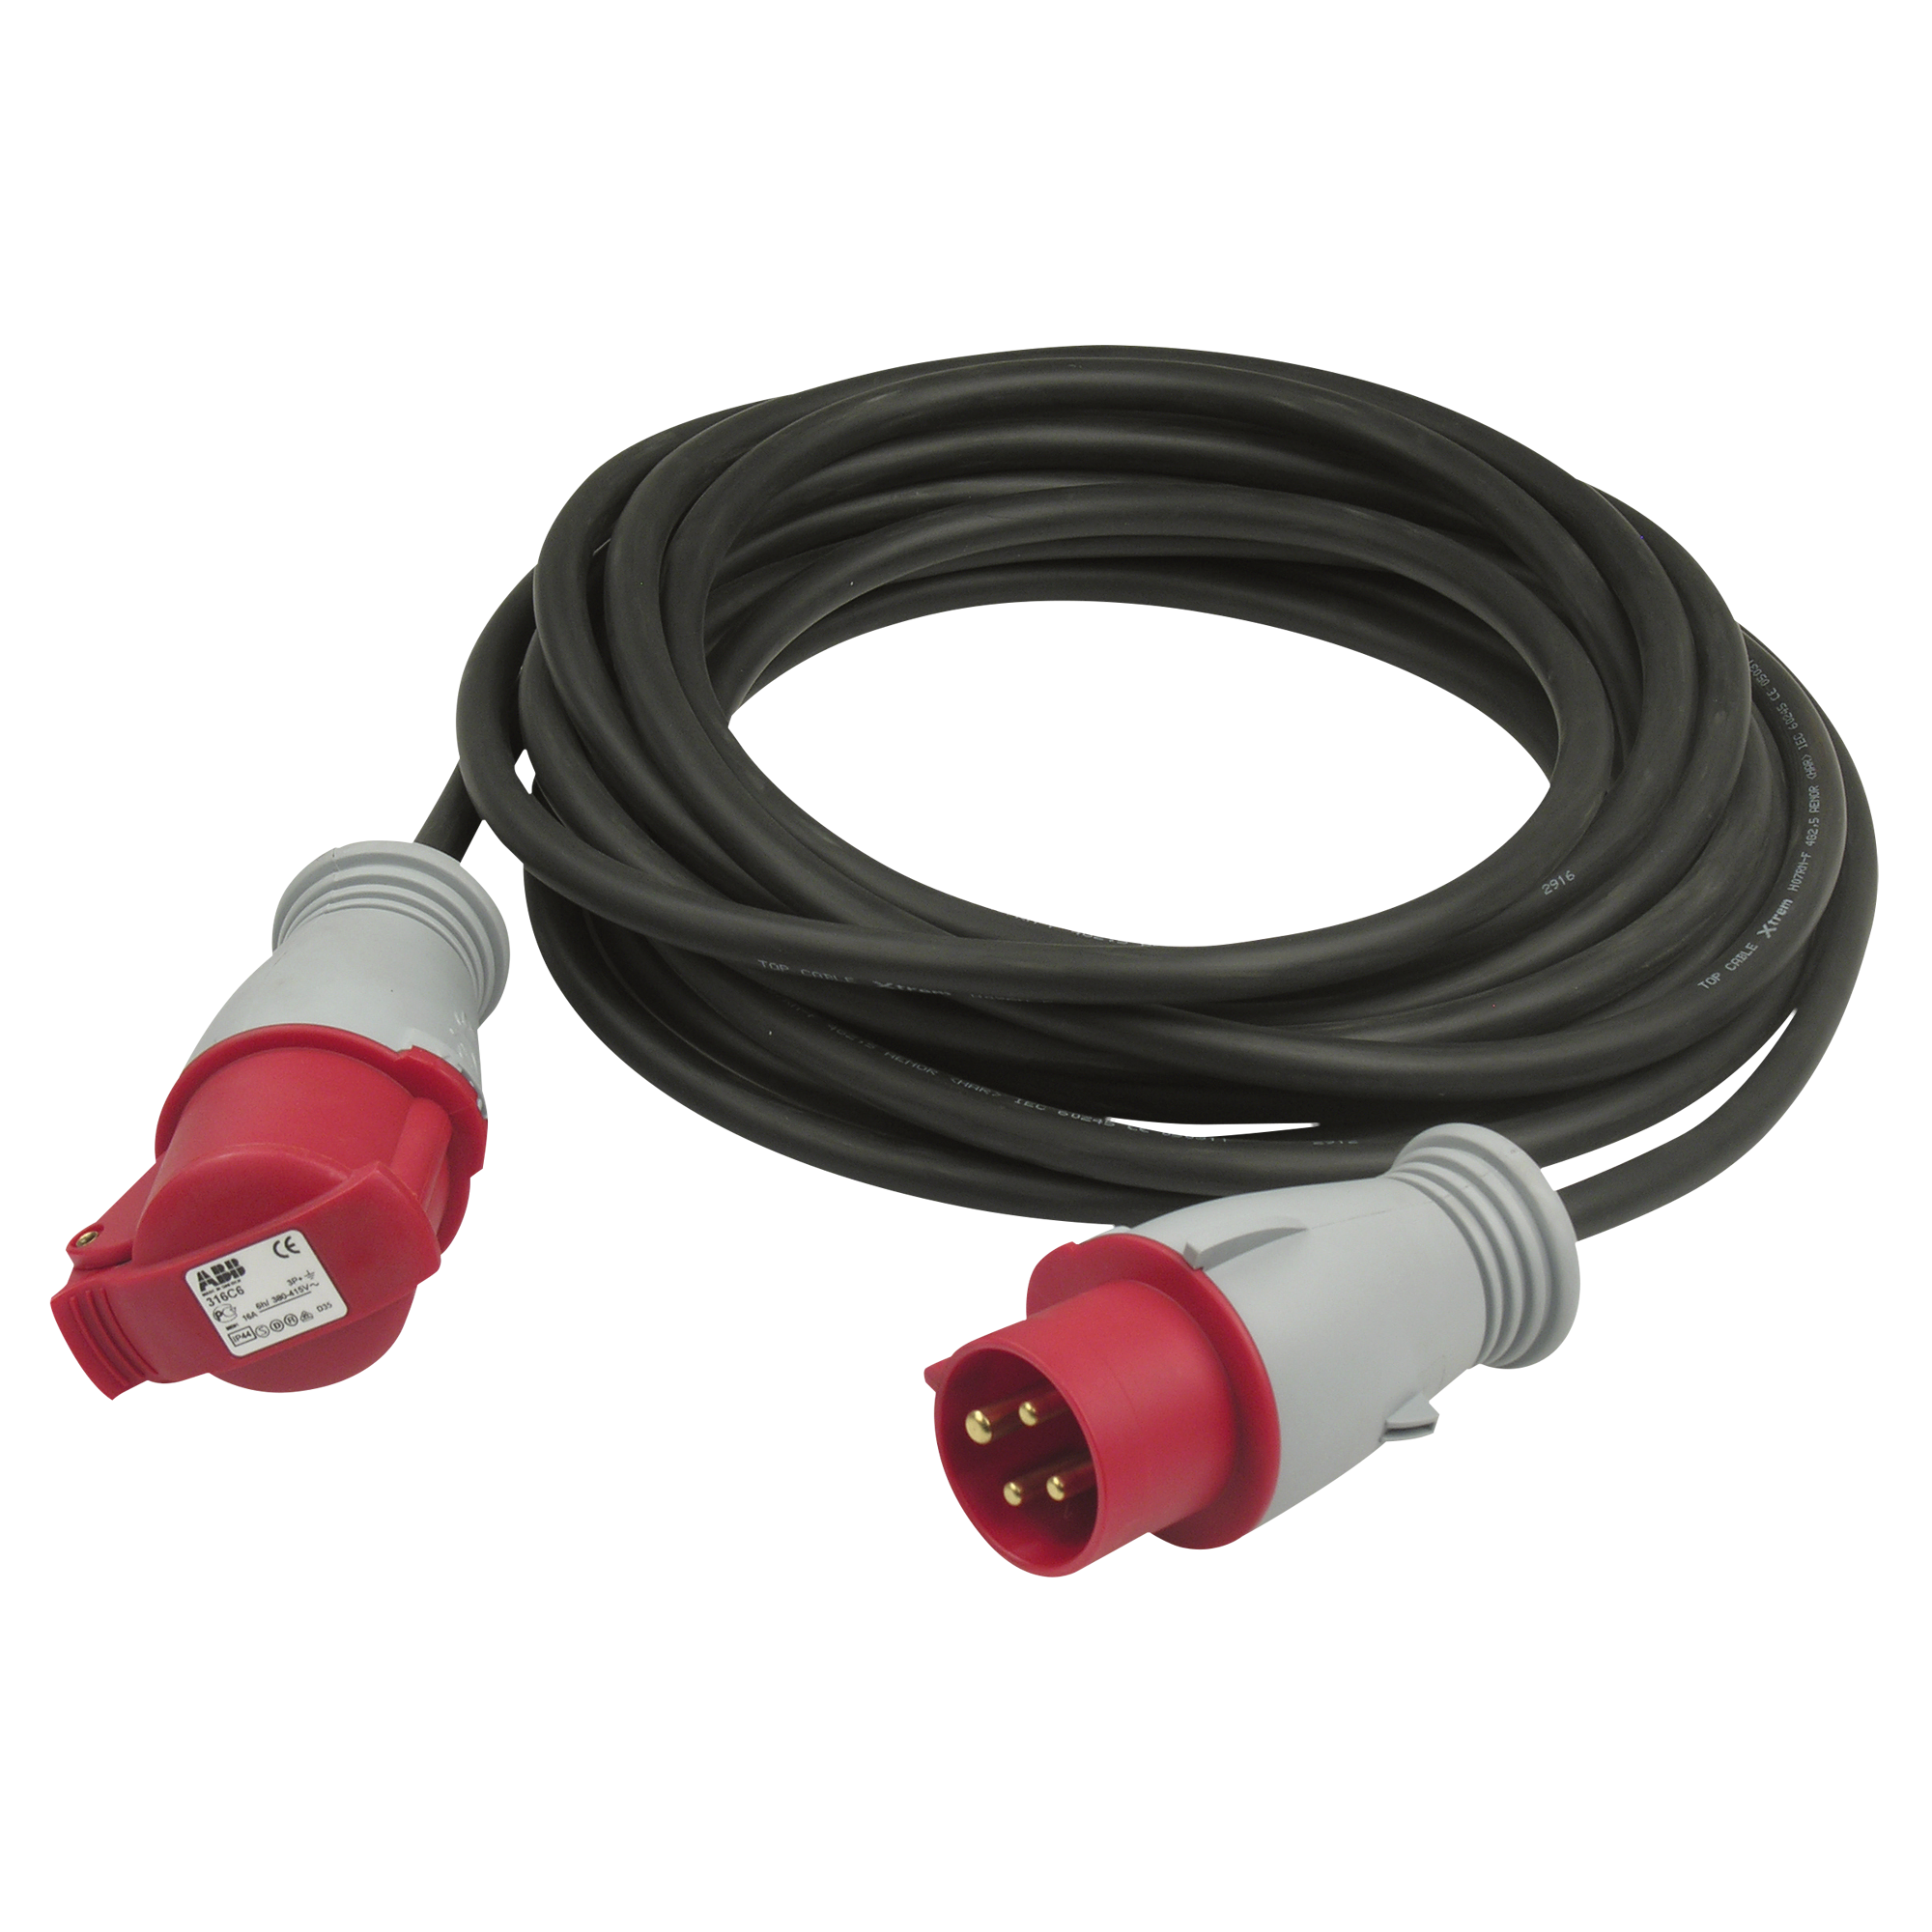 DAP Motor cable CEE 4P 16 A Red Rot